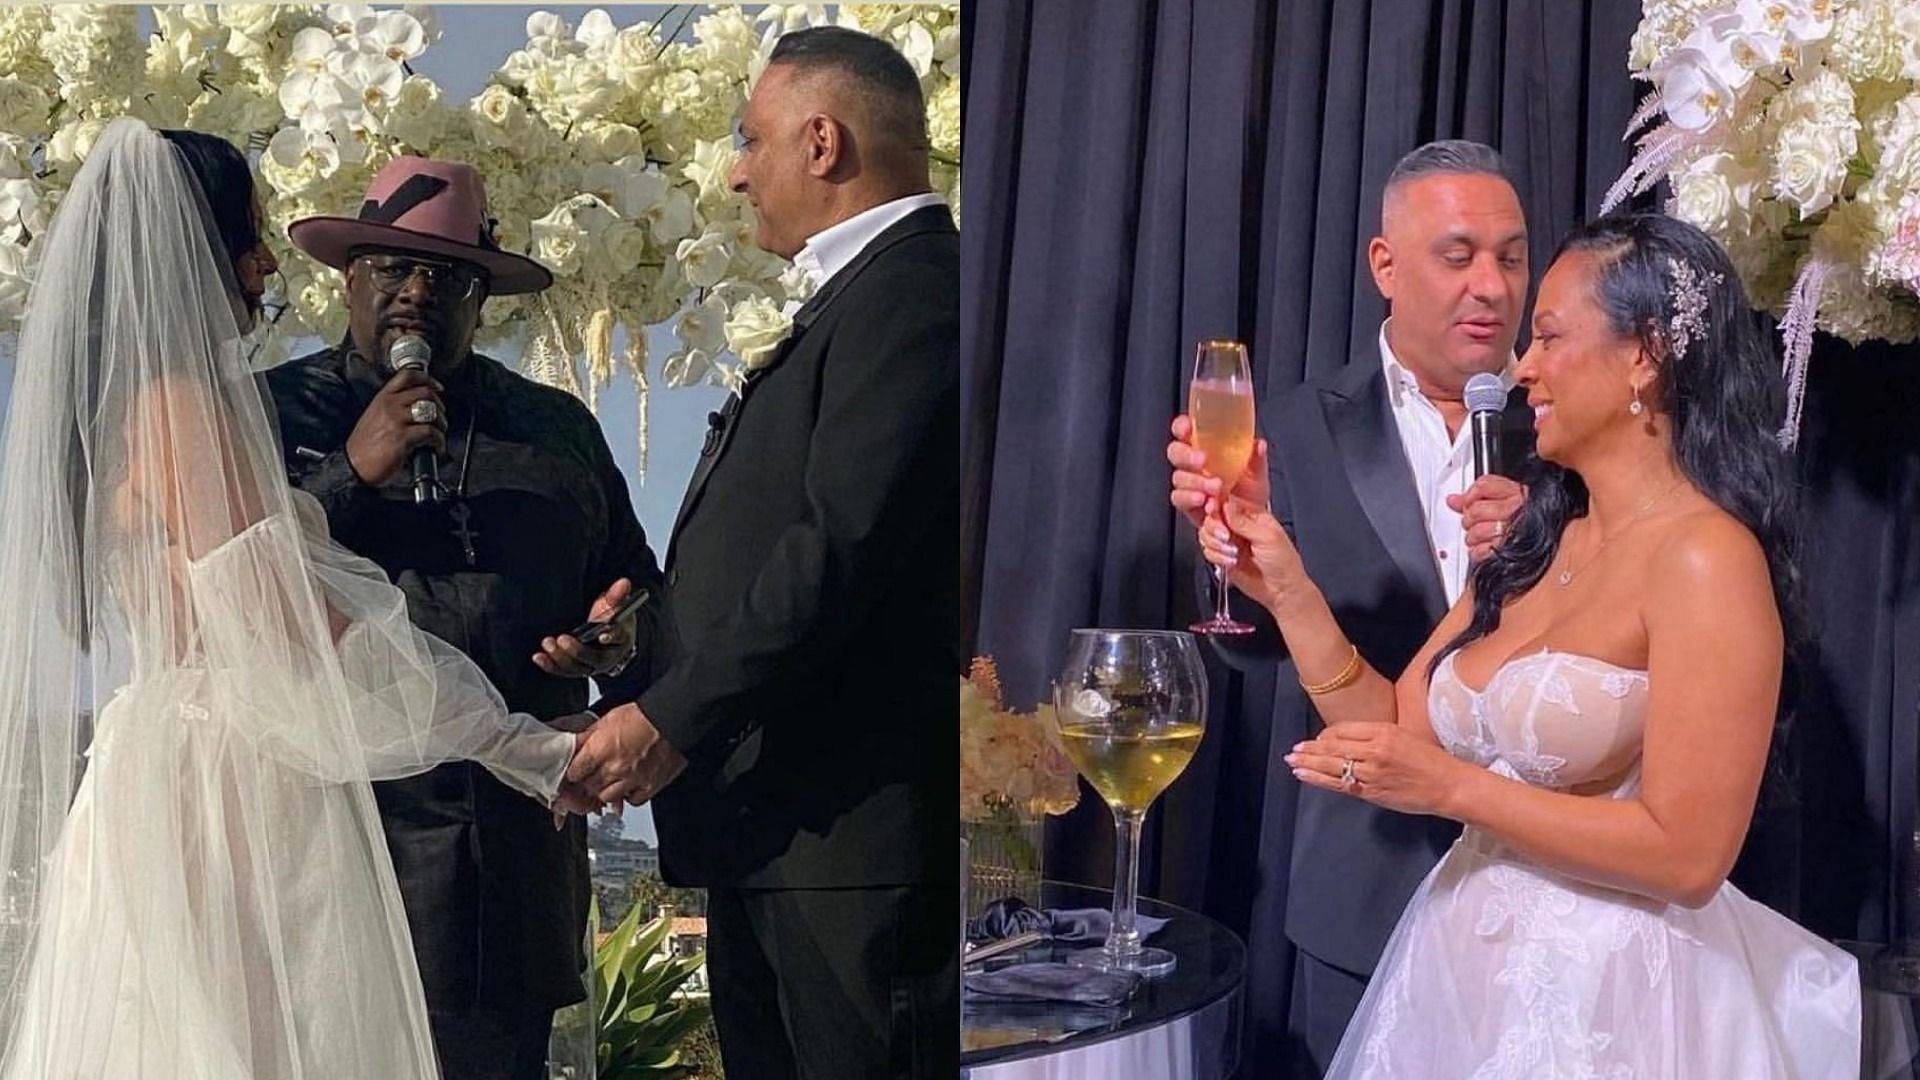 Ali and Russell Peters at their wedding (Images via @russellpeters/Instagram)